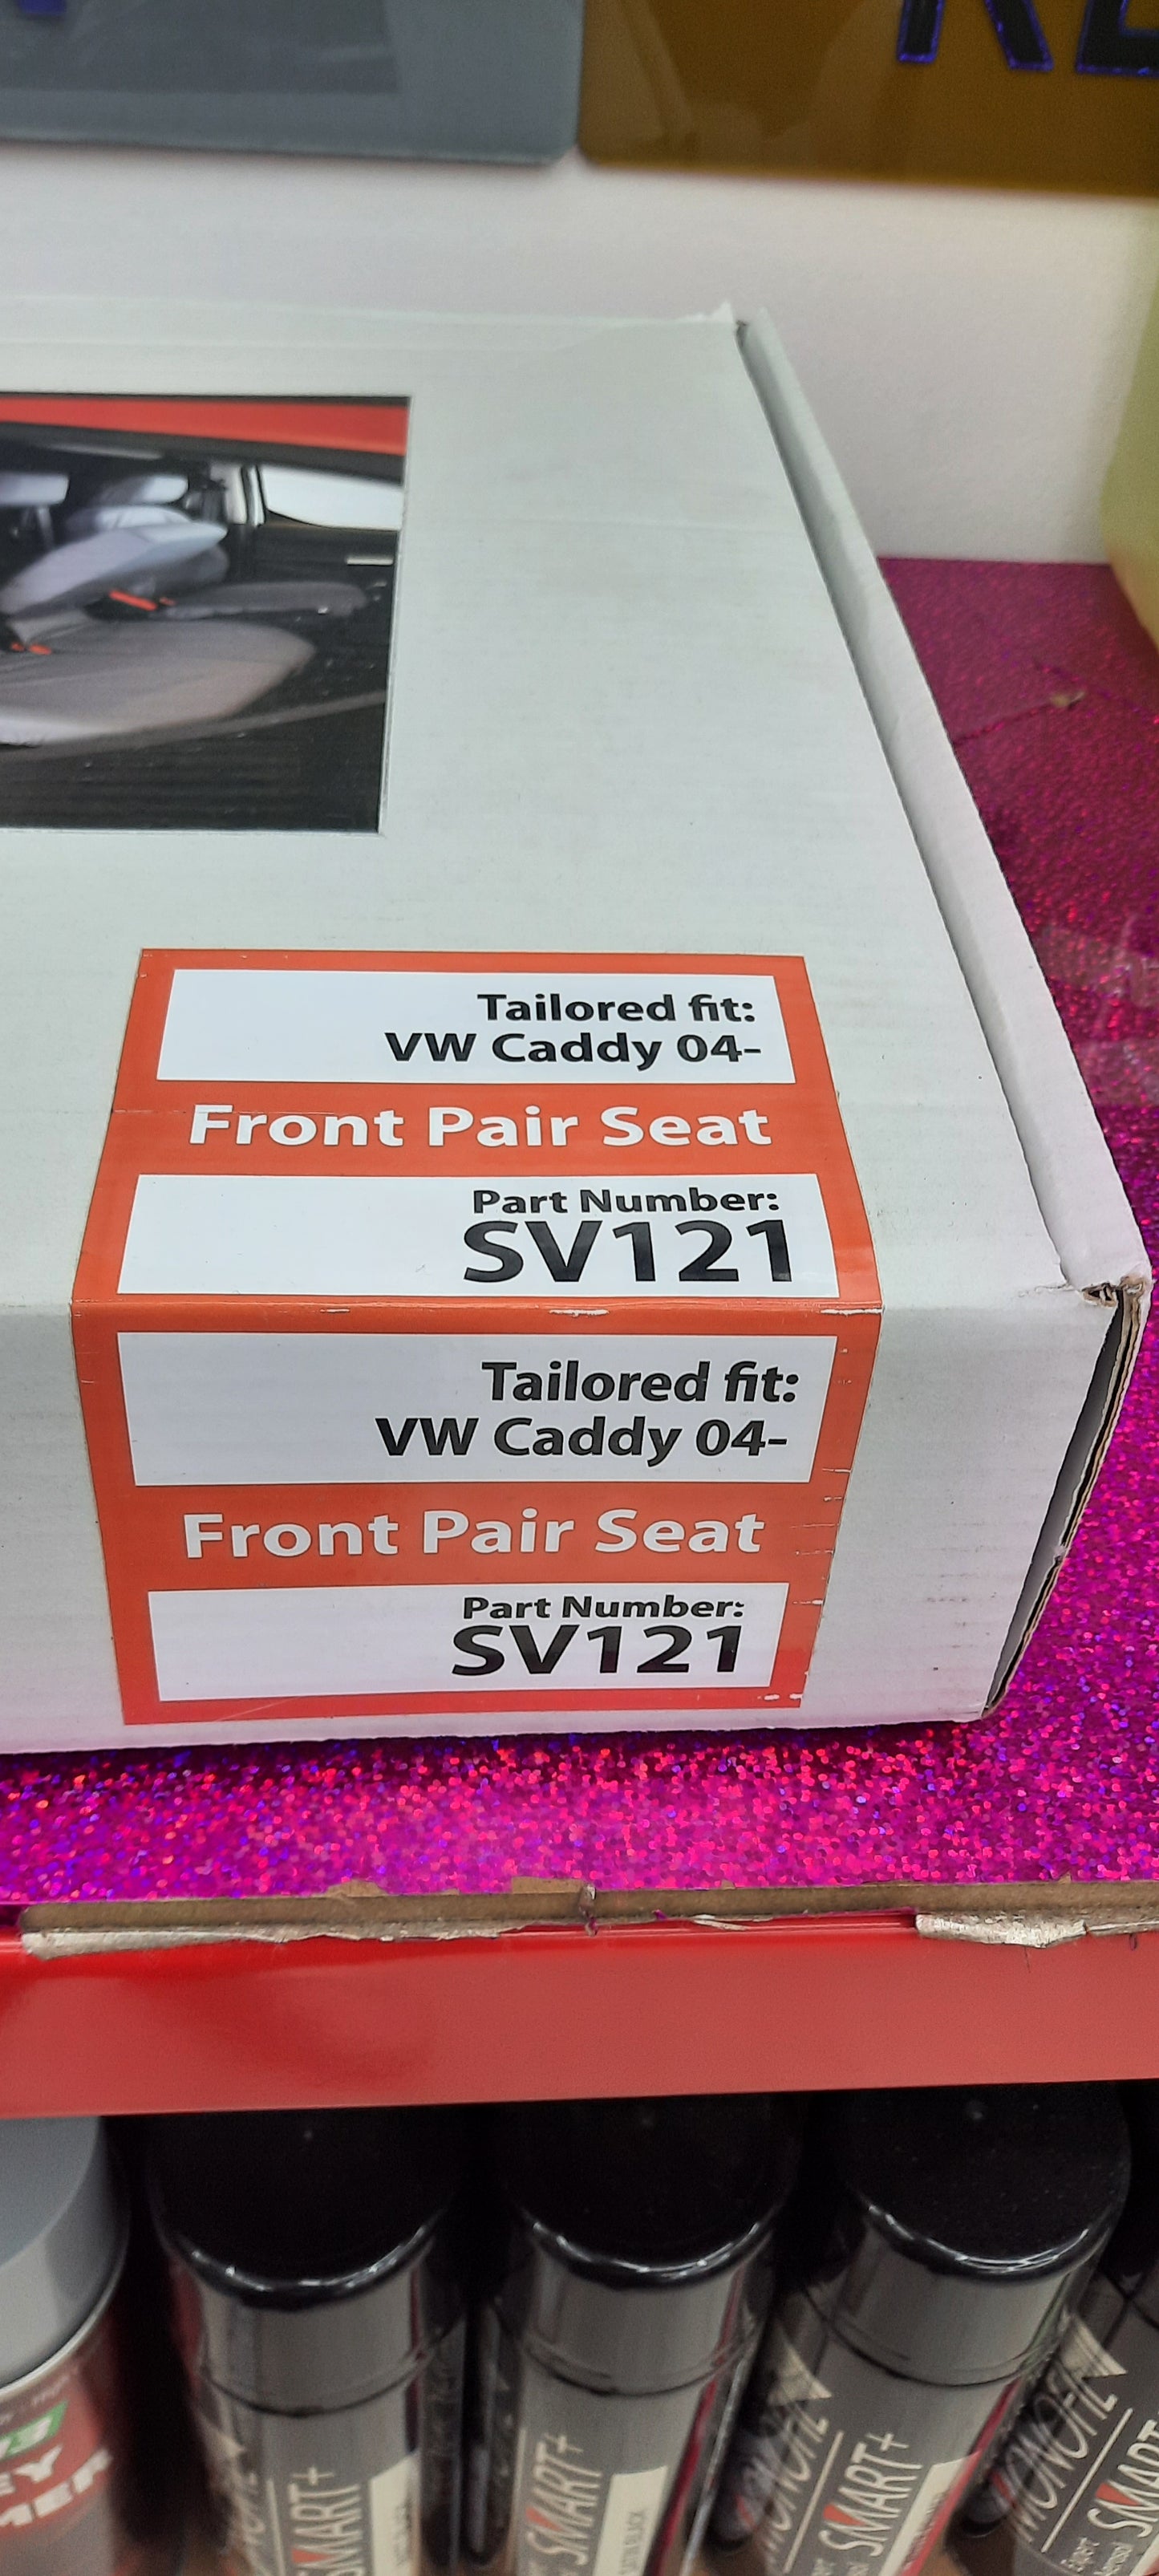 Vw Caddy Tailor Fit seat covers - 2004 -2021